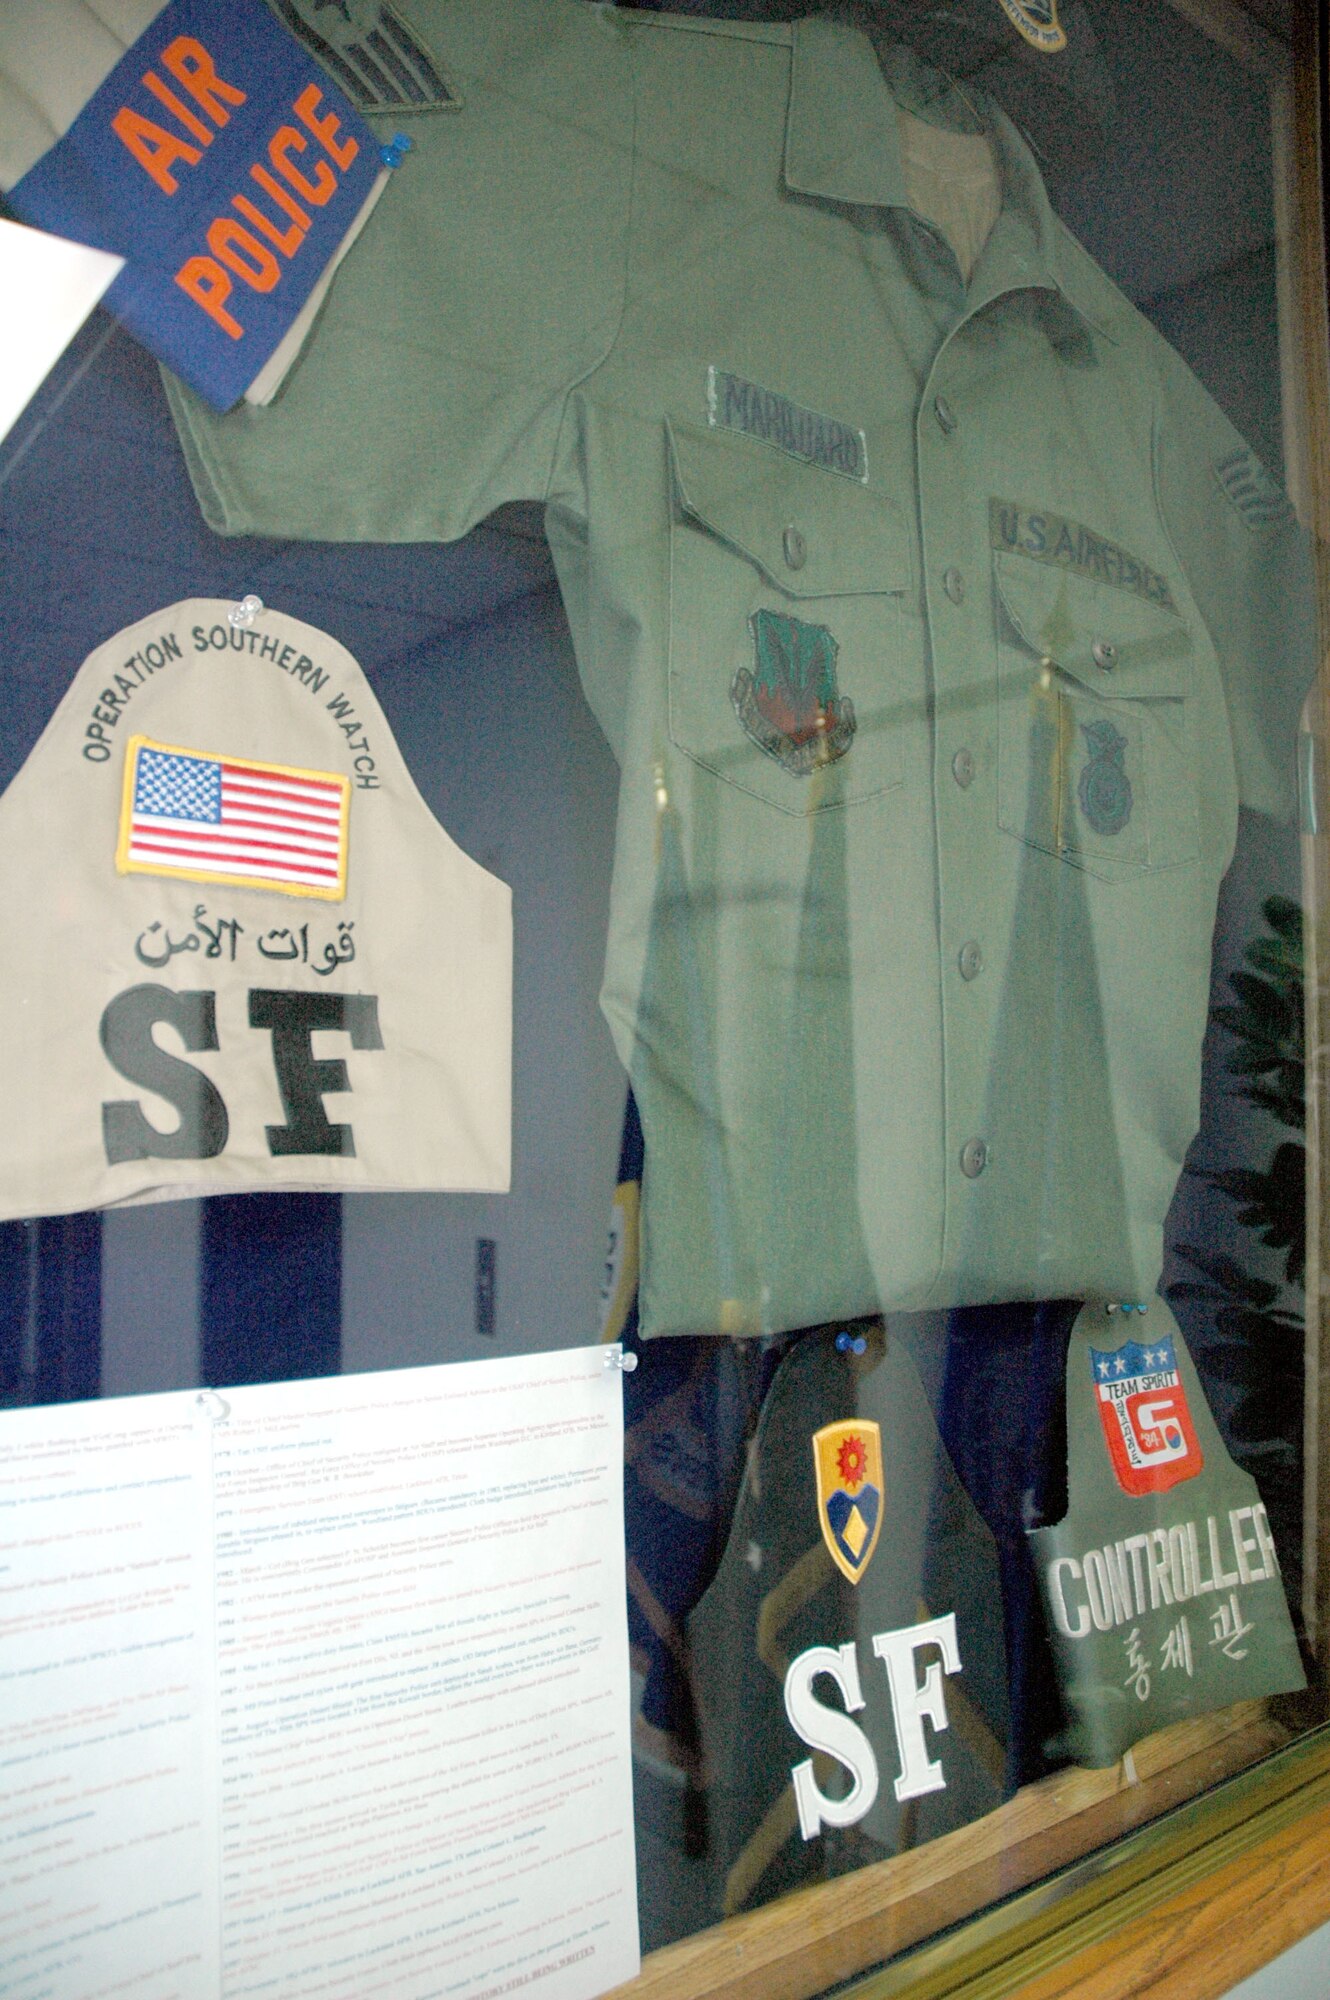 This uniform worn by security forces Airmen throughout the 1980s is part of a larger military police uniform heritage display in the 341st Security Forces Group headquarters in building 500. A vast mural was painted at the entryway; the hallways display posters and images of the past and present; and a uniform display was donated by Chief Master Sgt. Jerry Hanes, 341st Operations Group interim superintendent. (U.S. Air Force photo/Senior Airman Eydie Sakura)